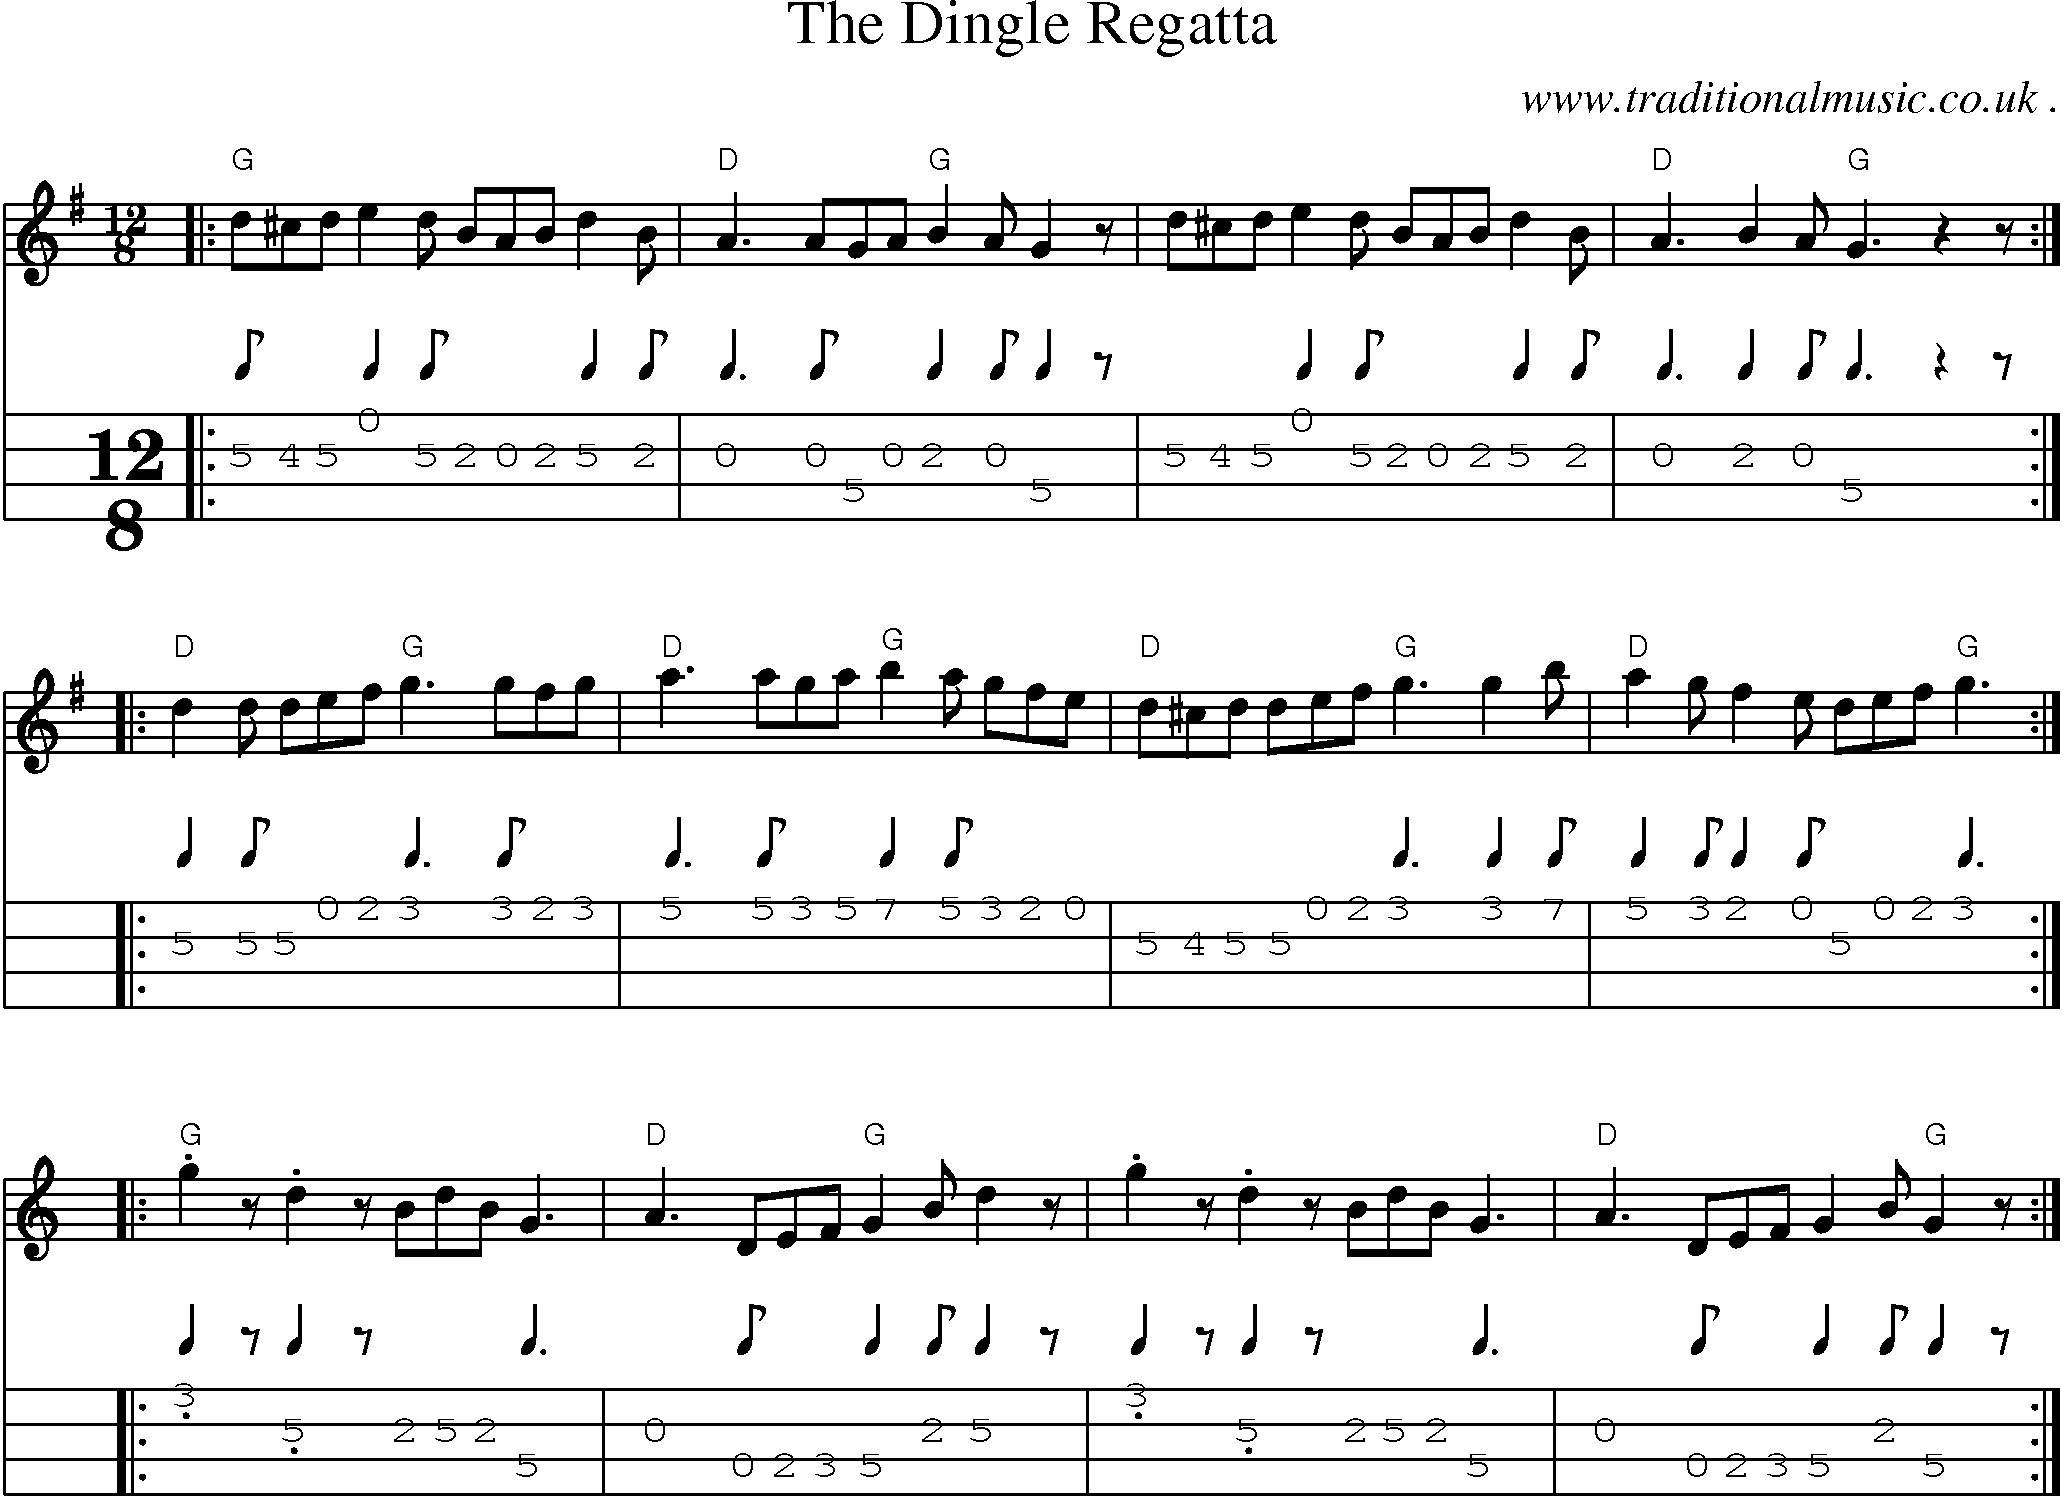 Music Score and Guitar Tabs for The Dingle Regatta